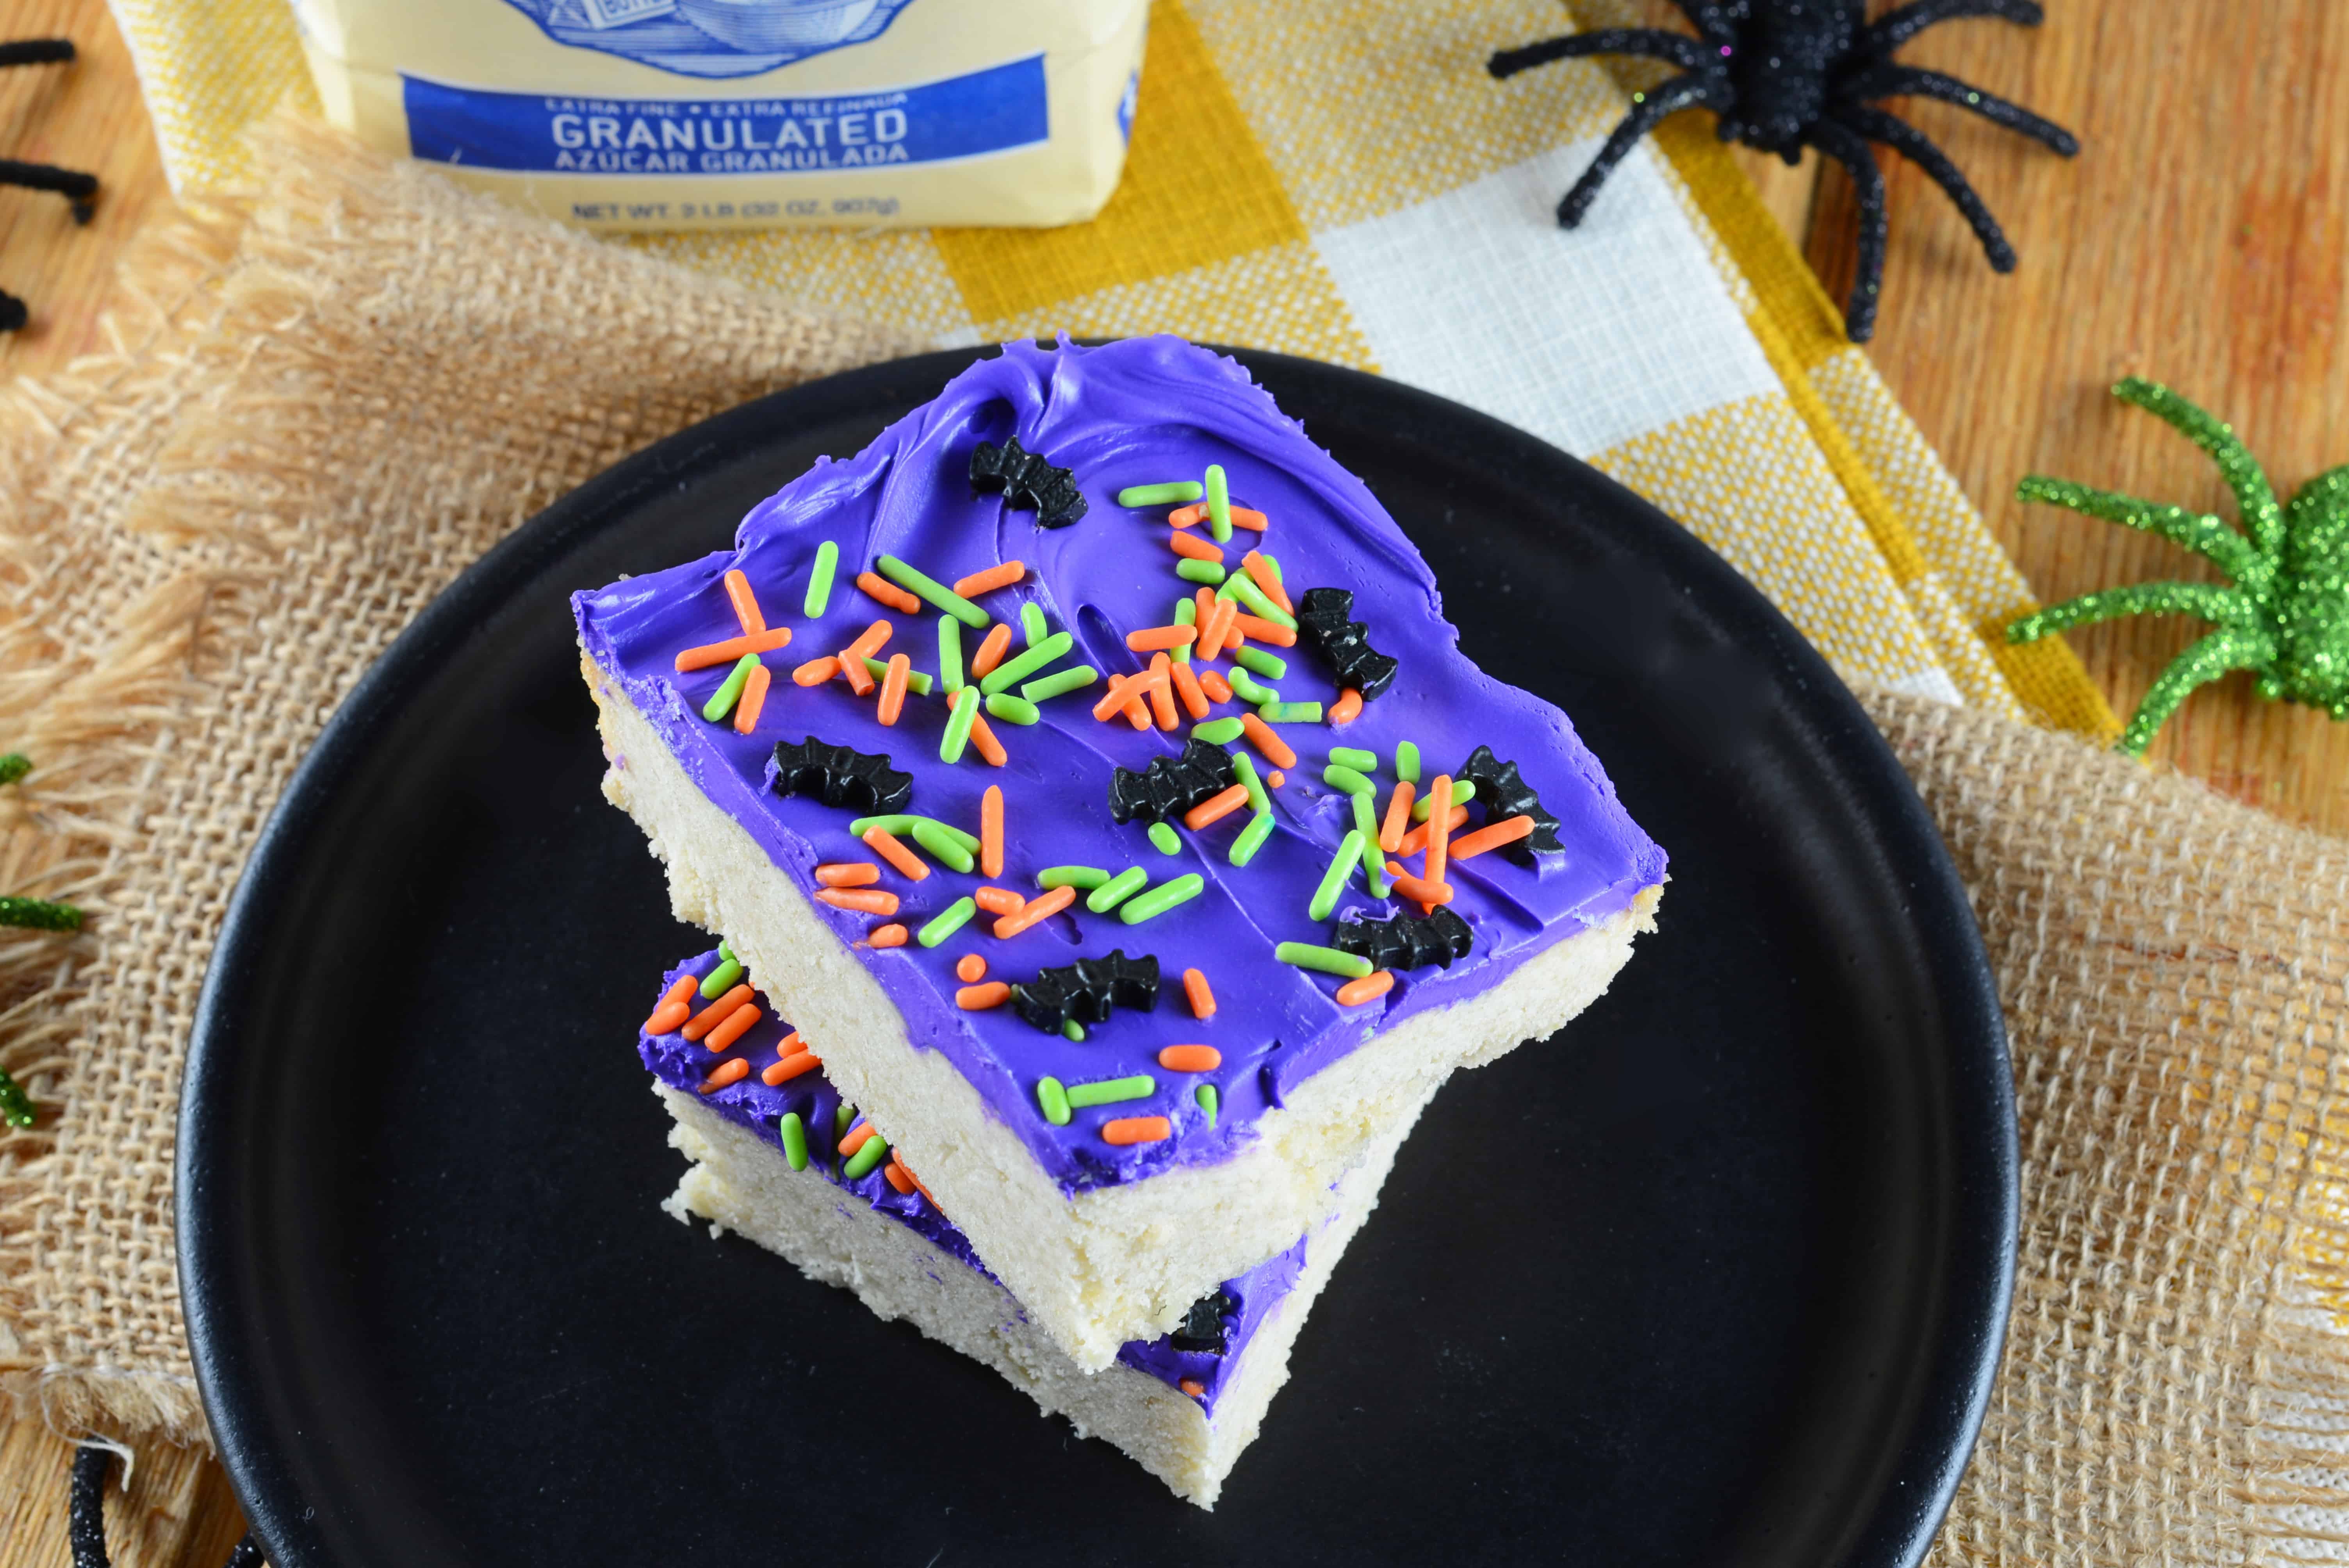 Halloween Sugar Cookie Bars are thick and chewy, frosted with a classic buttercream and topped with festive sprinkles.